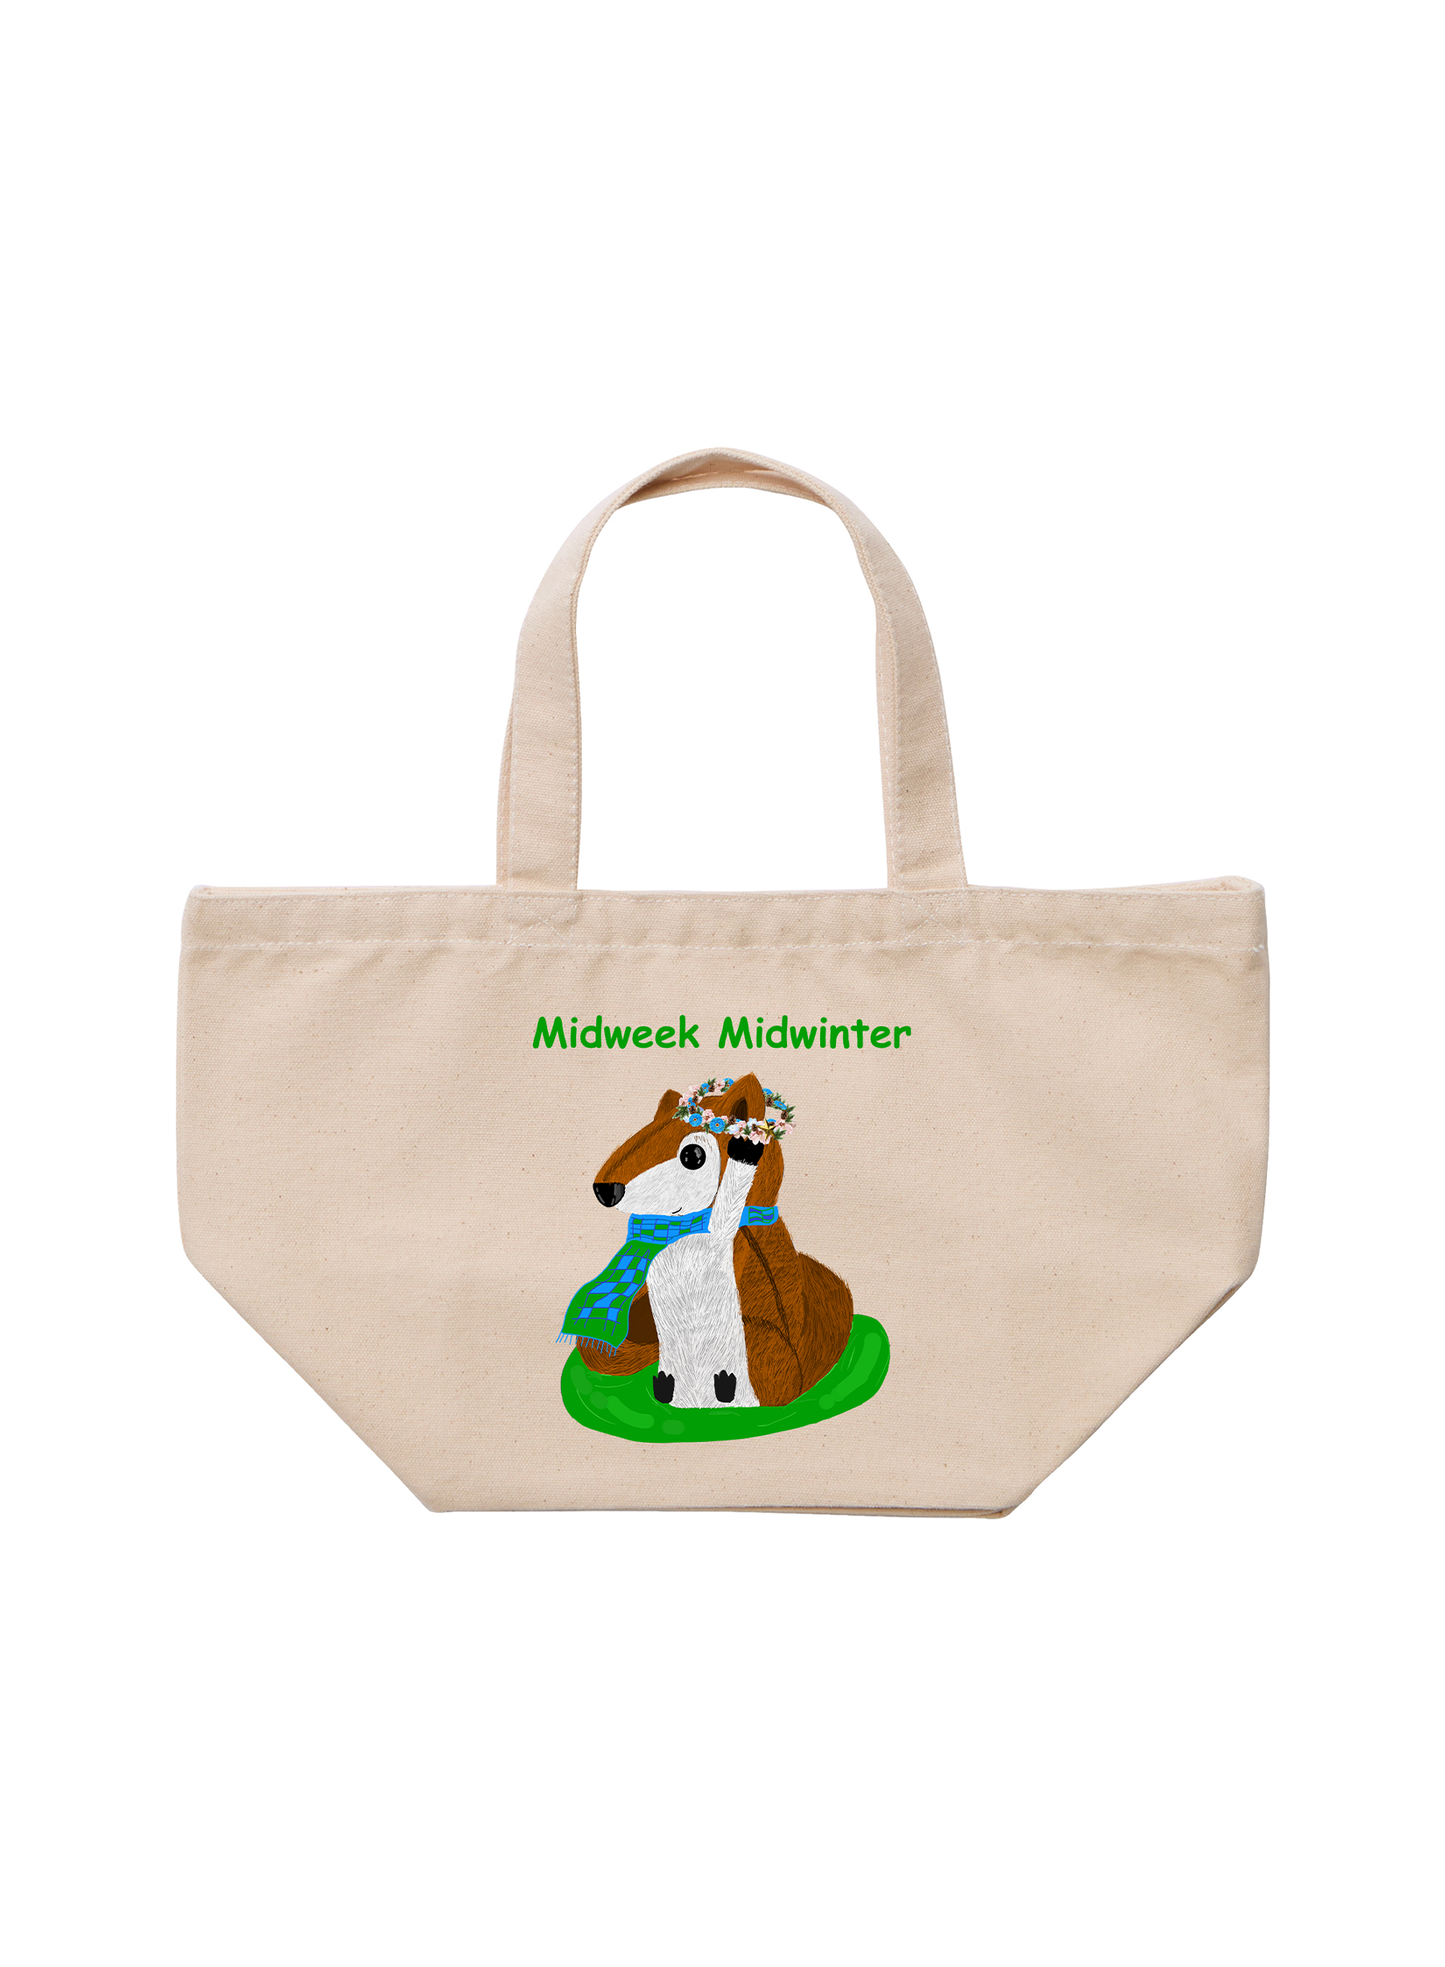 Lunch bag 【Midweek Midwinter】 Natural